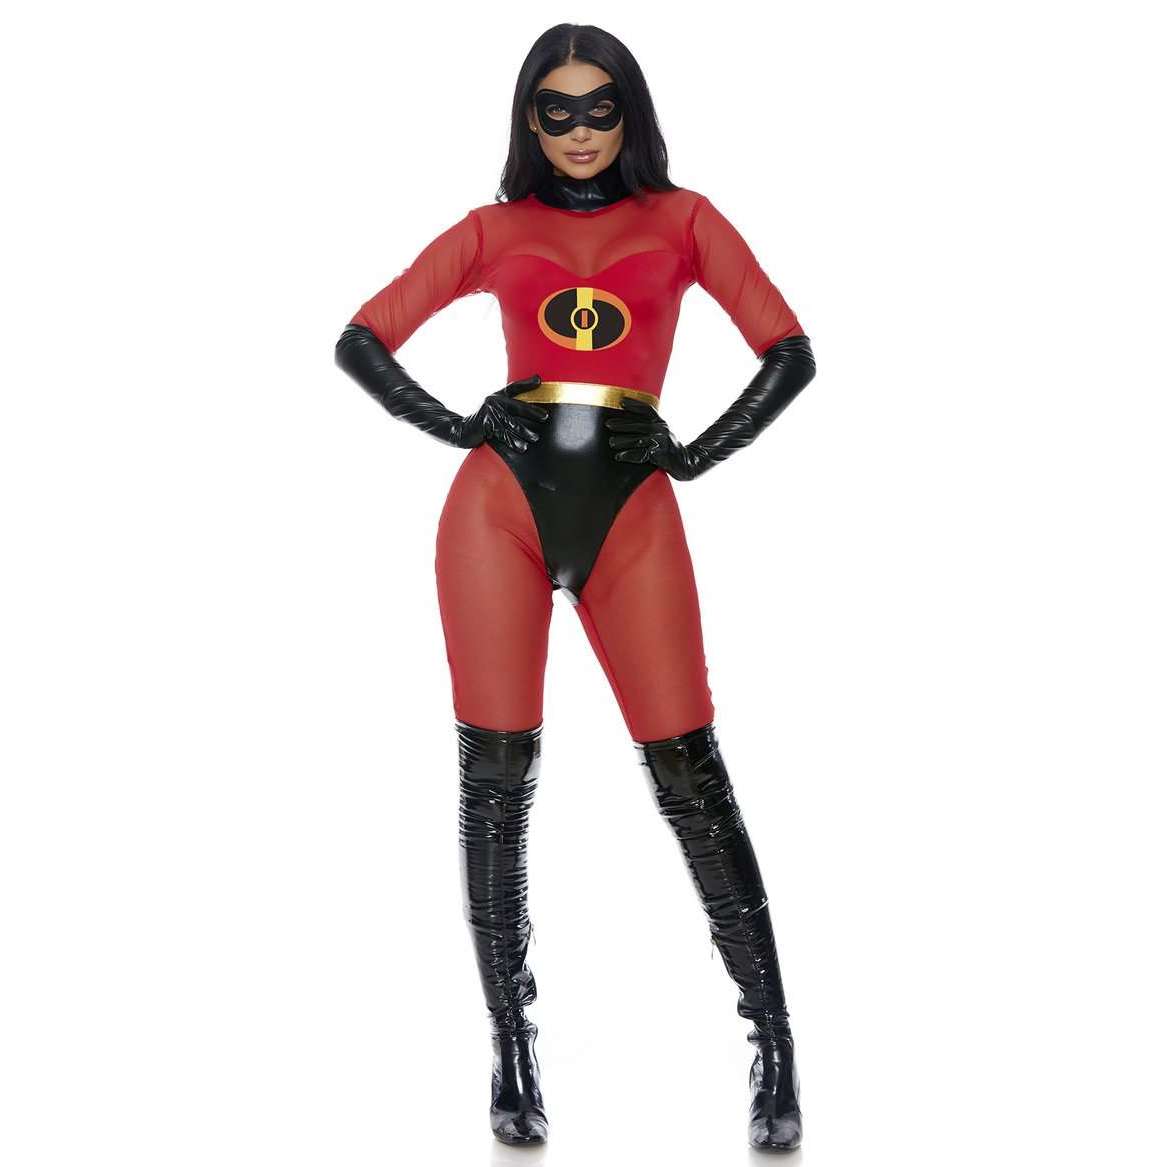 Iconic Super Suit Women's Movie Character Adult Costume